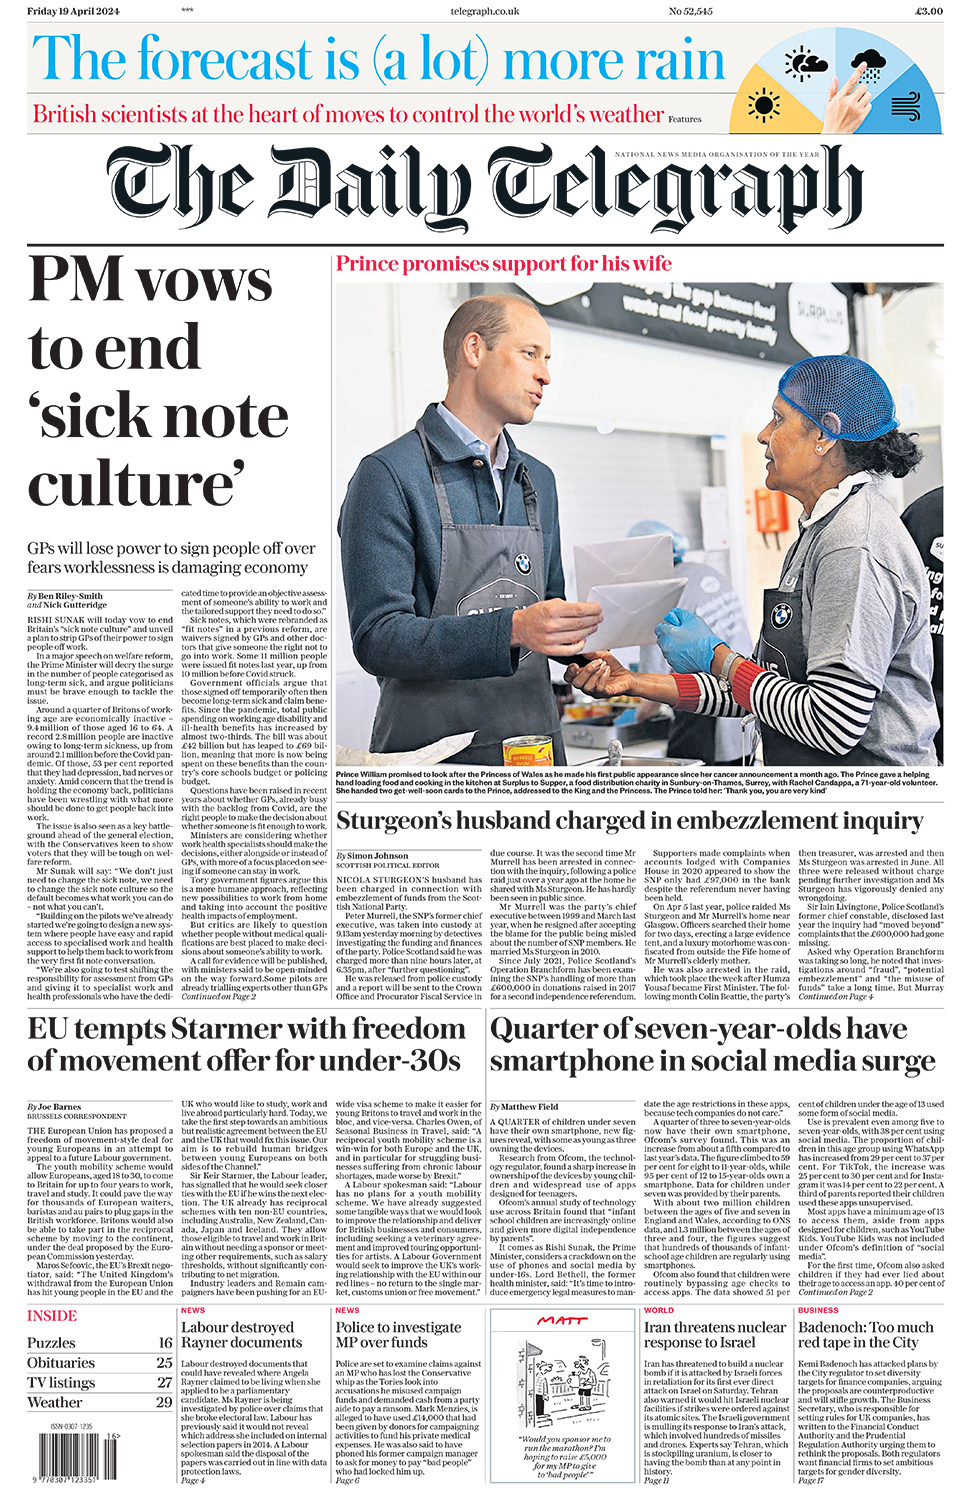 The headline in the Telegraph reads: "PM vows to end 'sick note culture'".